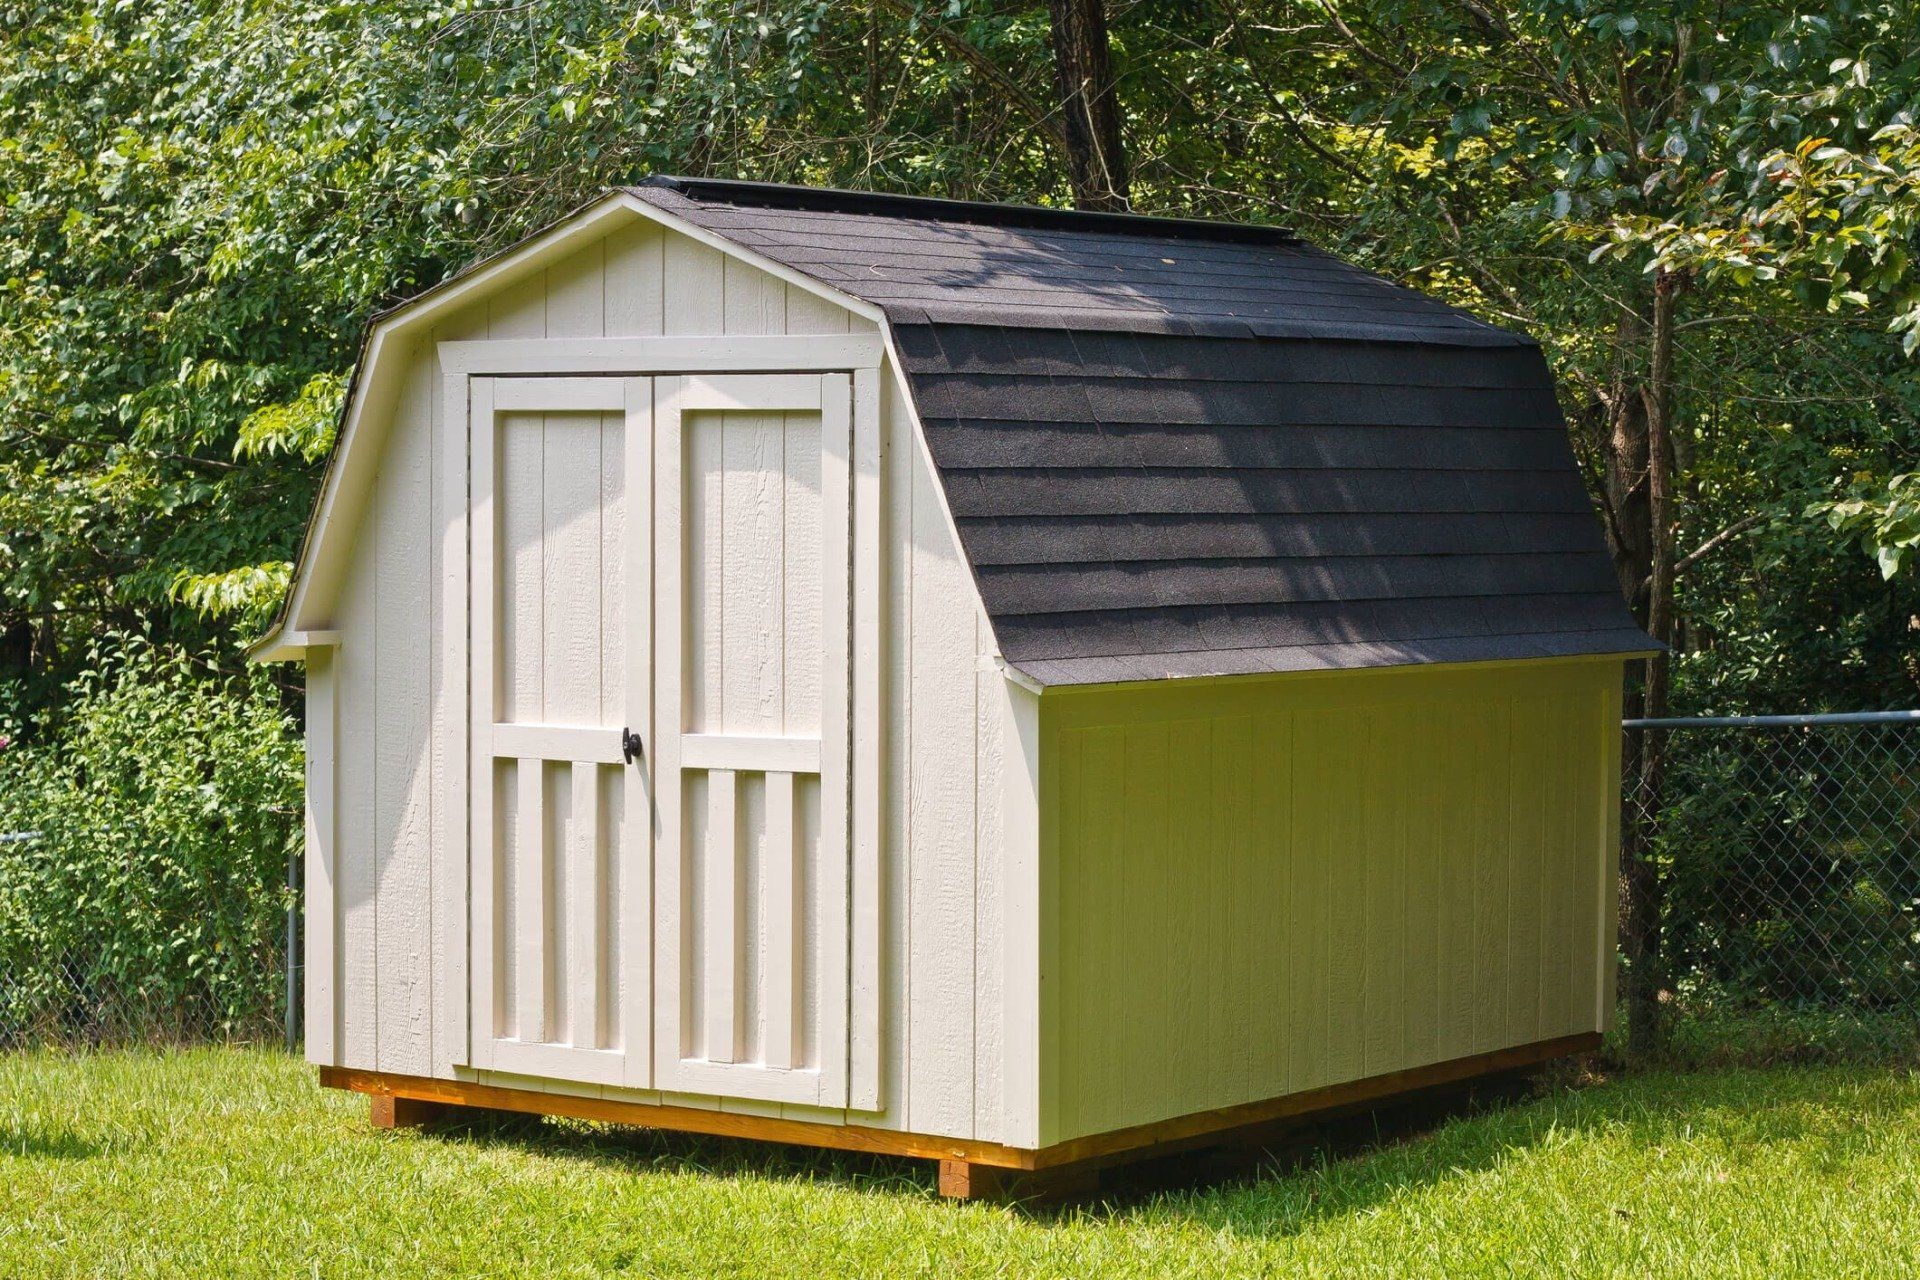 Garden Sheds - Residential Remodeling in Channahon, IL